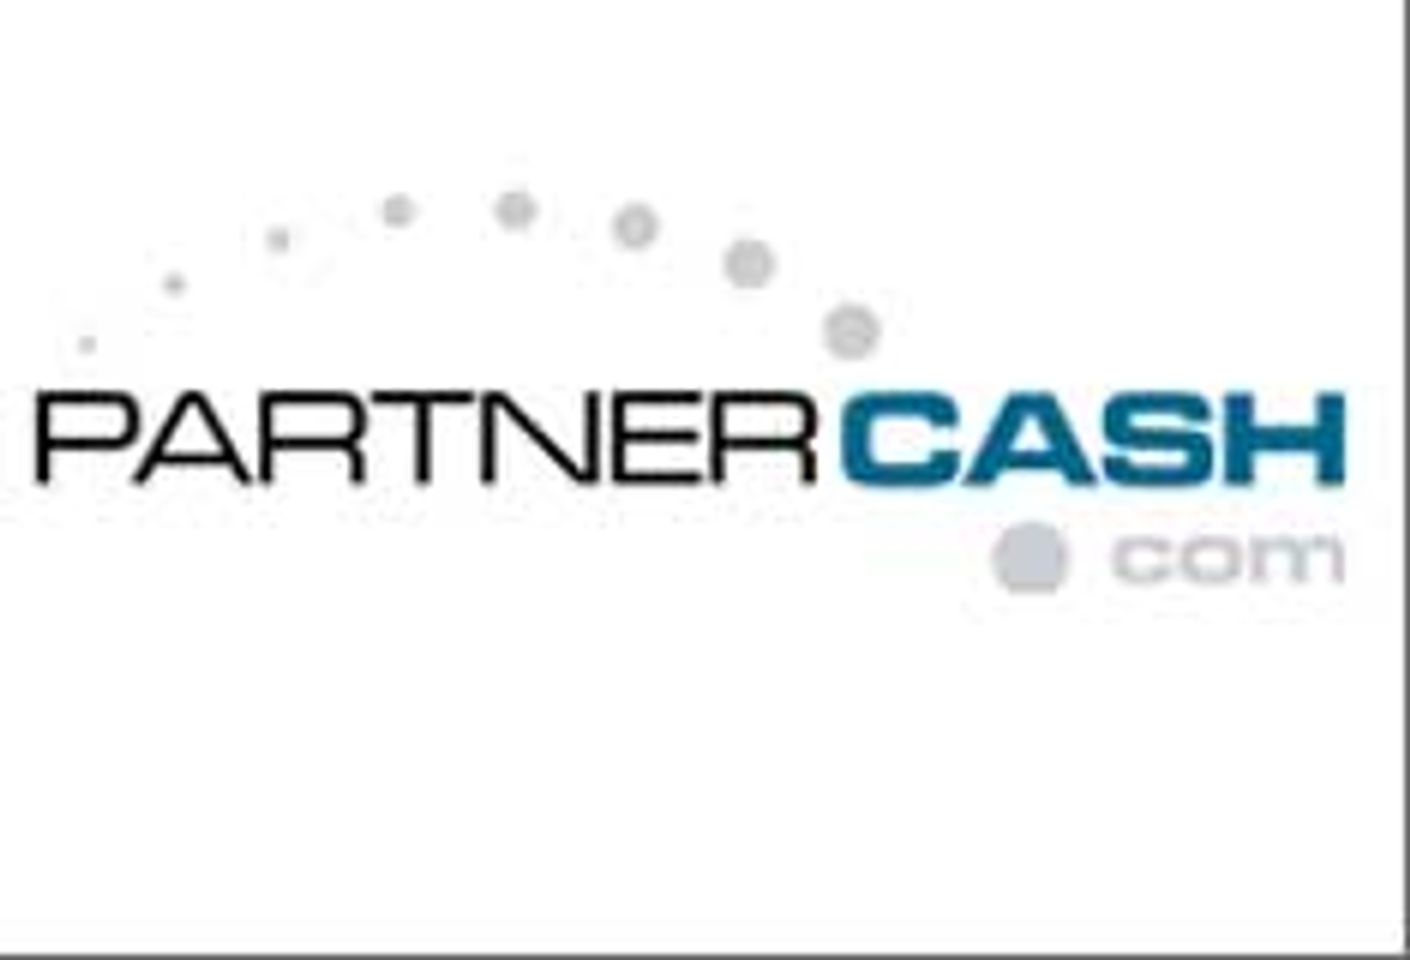 PartnerCash Offers Opportunities in the German Market